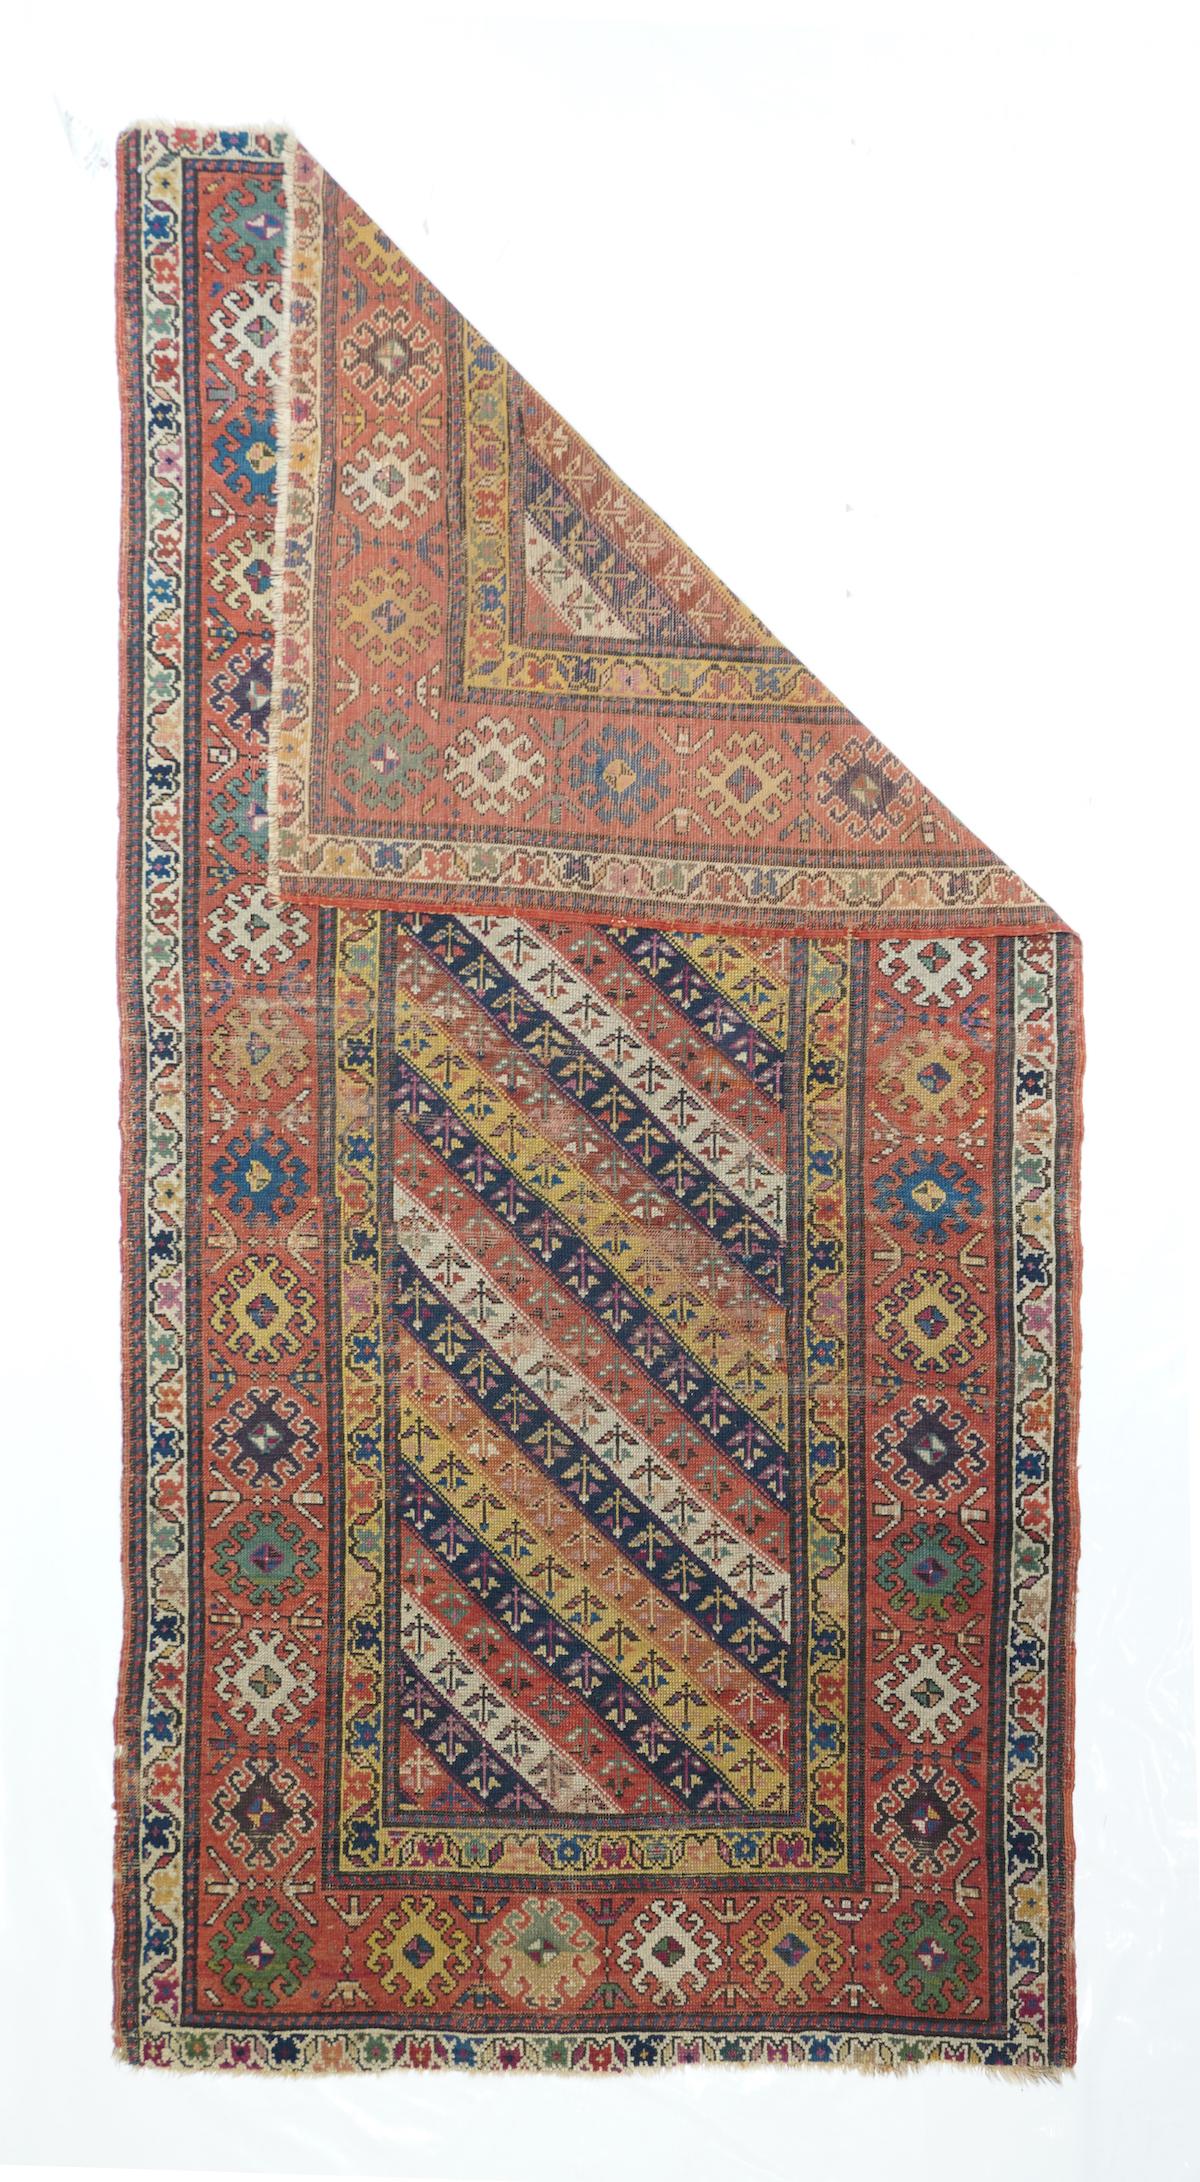 Antique Kazak 3'9'' x 7'7''. From the southern central Caucasus, this all wool kellegi (long rug) displays the characteristic diagonally striped pattern in equal width bands of yellow, rust, red, navy, and cream, all with similar repeating small